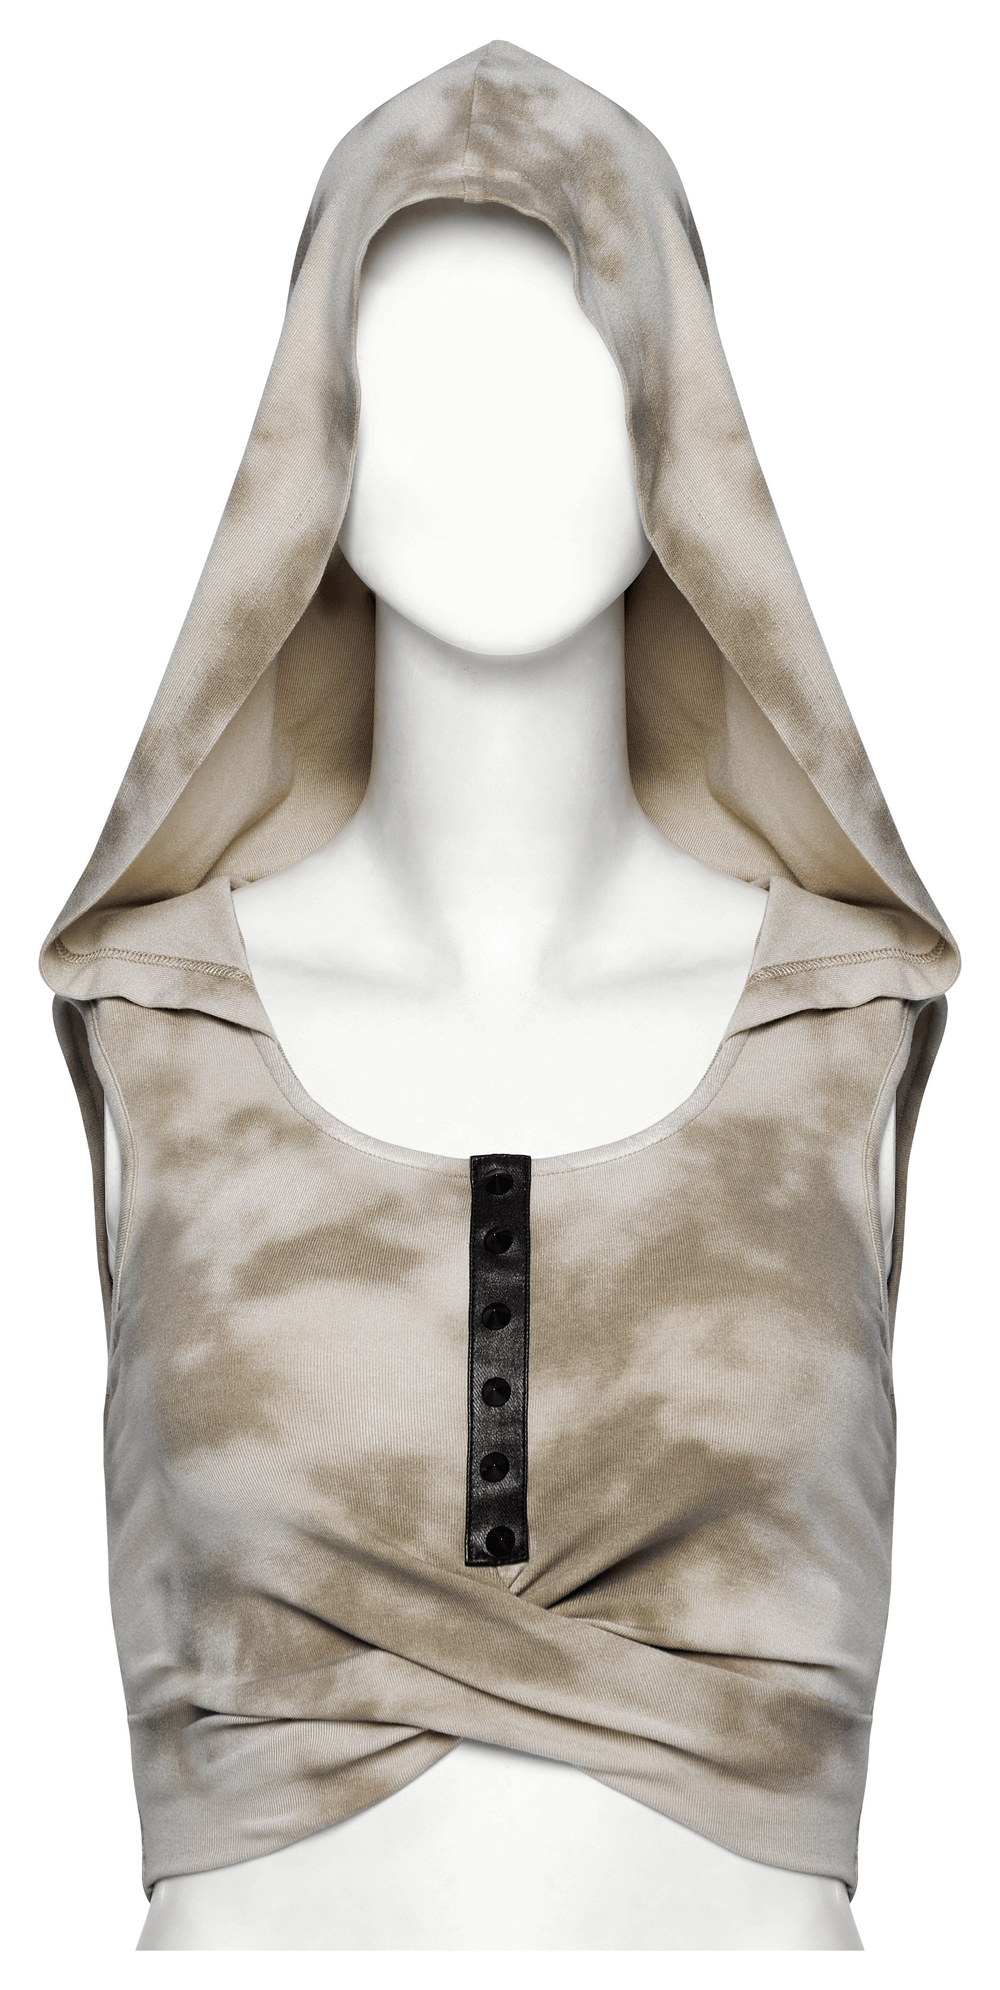 Trendy Hooded Crop Top with Hollow Back Design